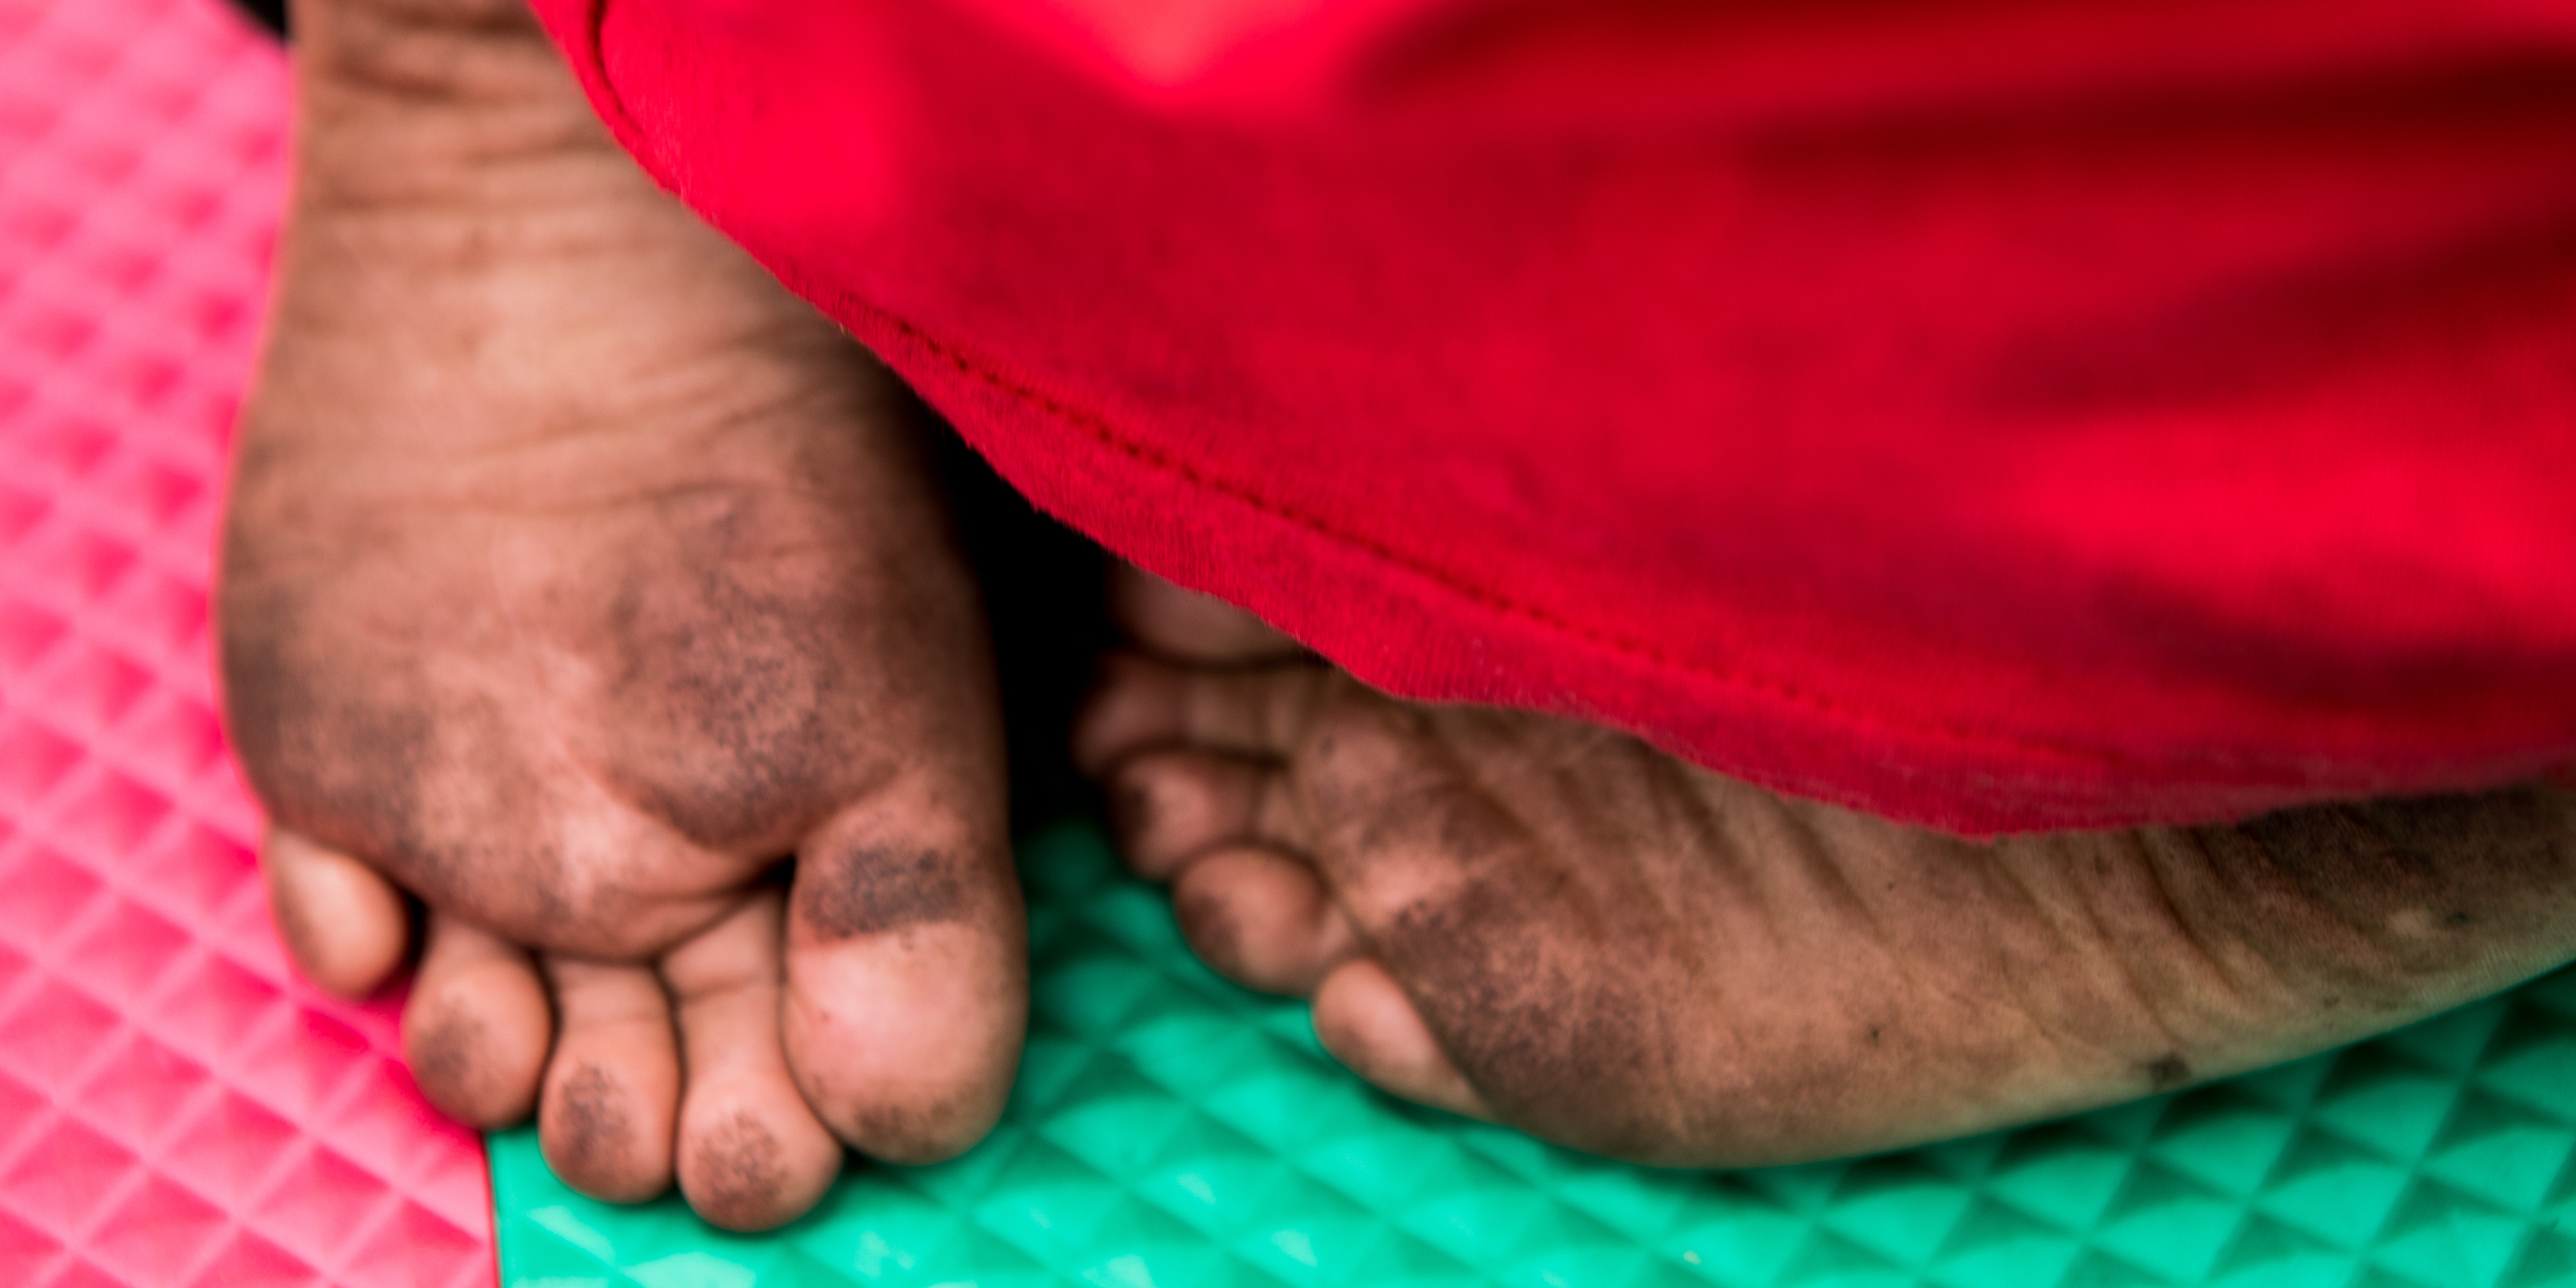 The tiny feet of a barefoot child resting on a colorful play mat in a child-friendly space are visible under a red blanket. The child’s feet are covered in dirt. Some children and families crossing the U.S. border have walked for several days and have not bathed, are hungry, sick and exhausted. Save the Children is running child-friendly spaces and children’s play areas at transit shelters in New Mexico for children once they leave detention facilities. Photo credit: Caroline Trutmann Marconi/ Save the Children, Nov 2018. 